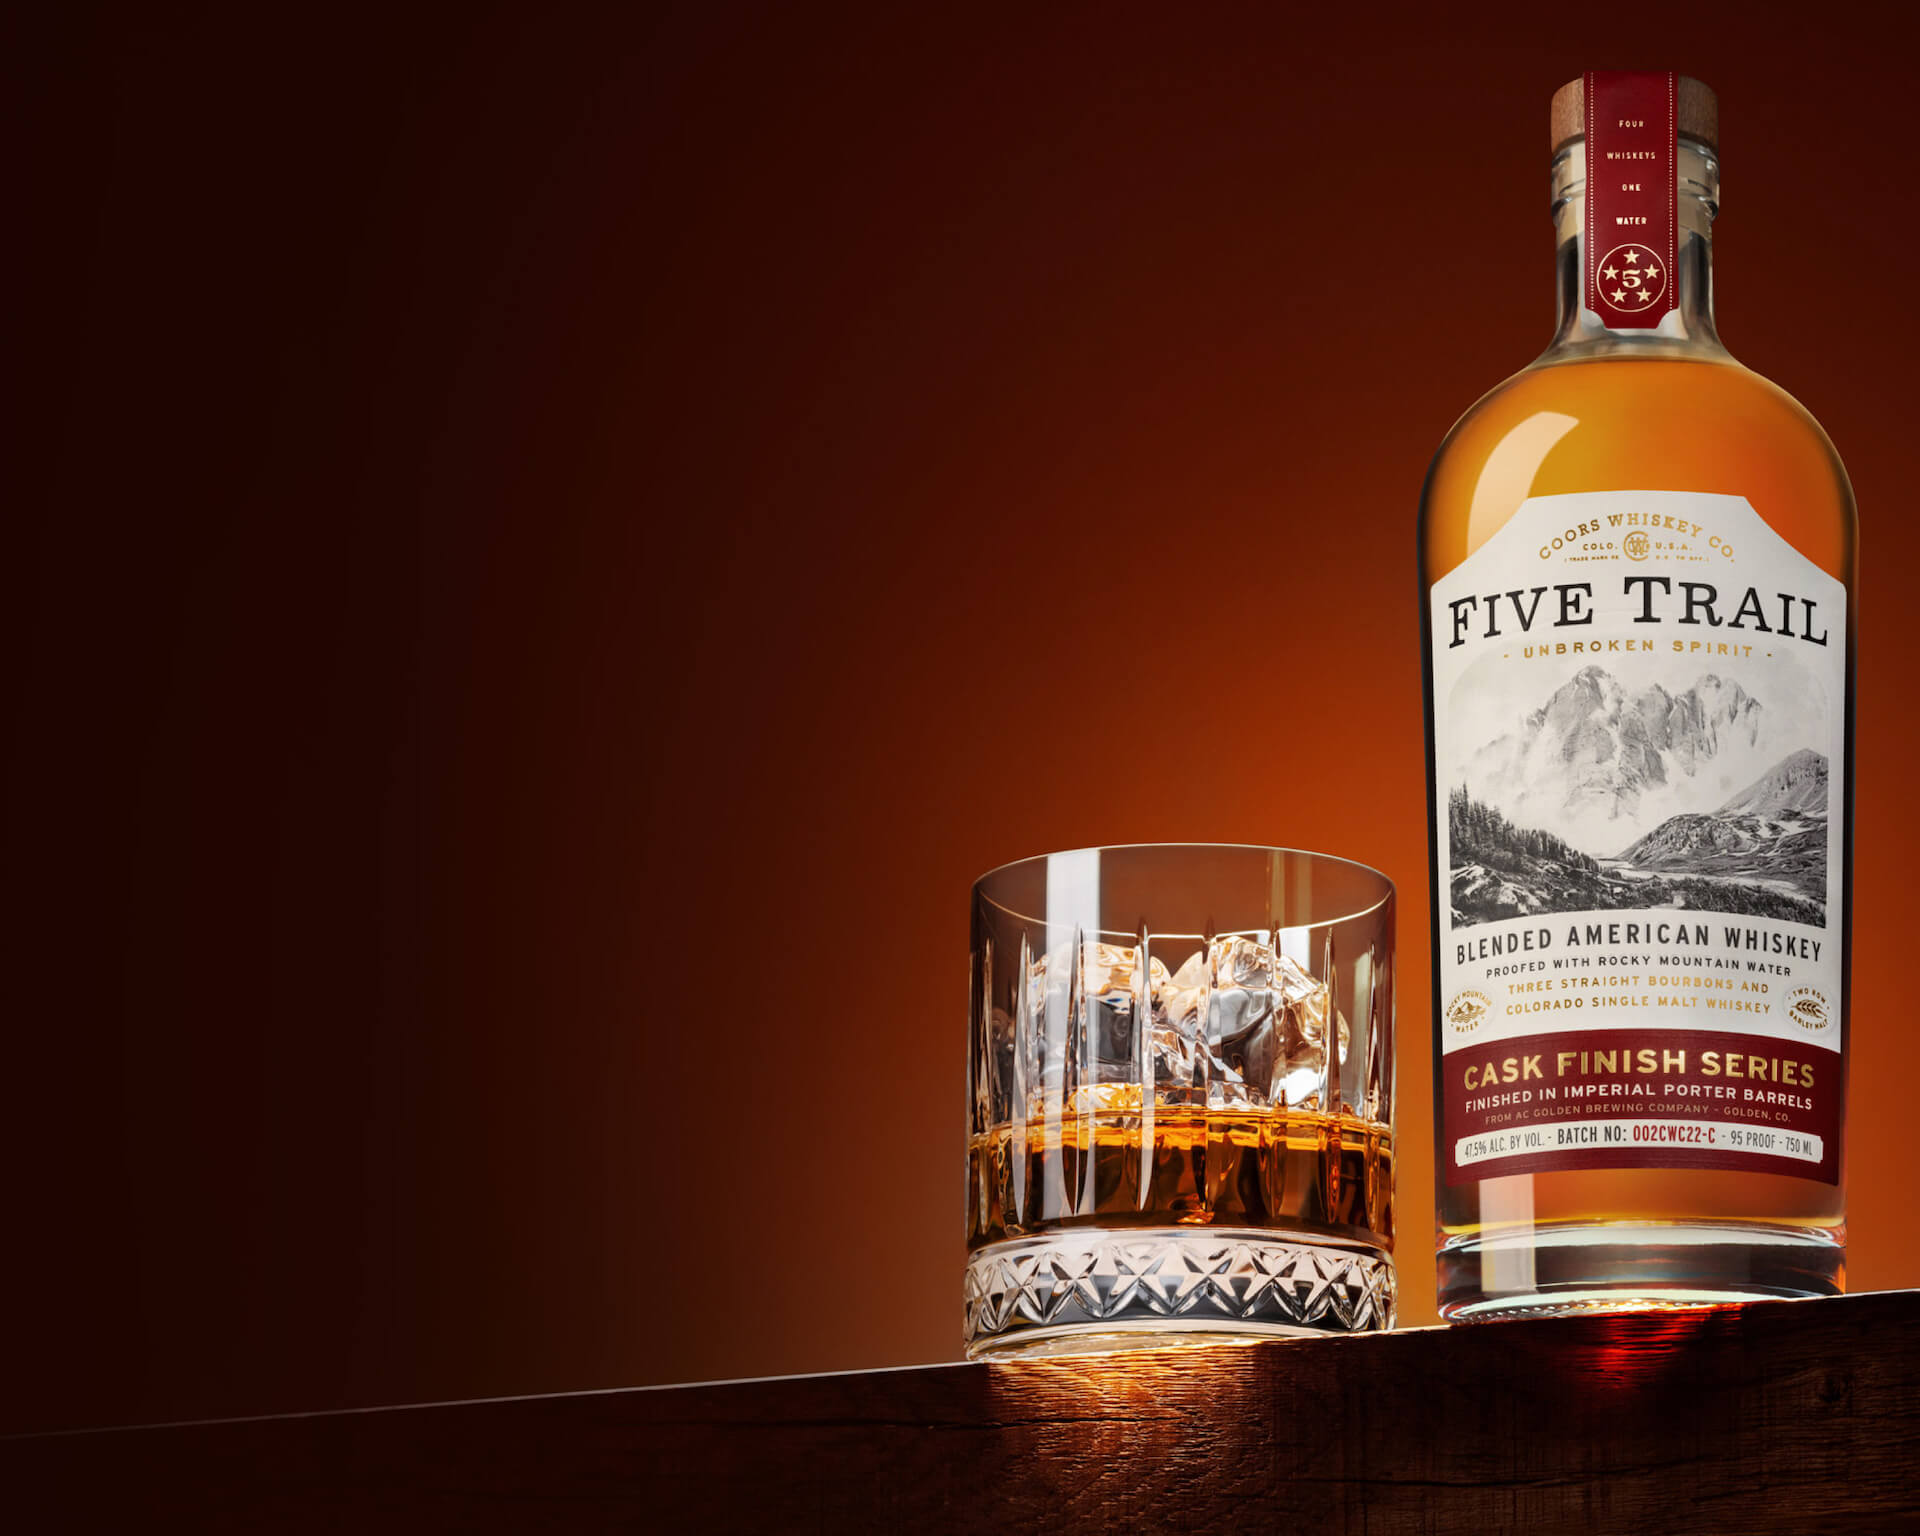 Cask finish series background